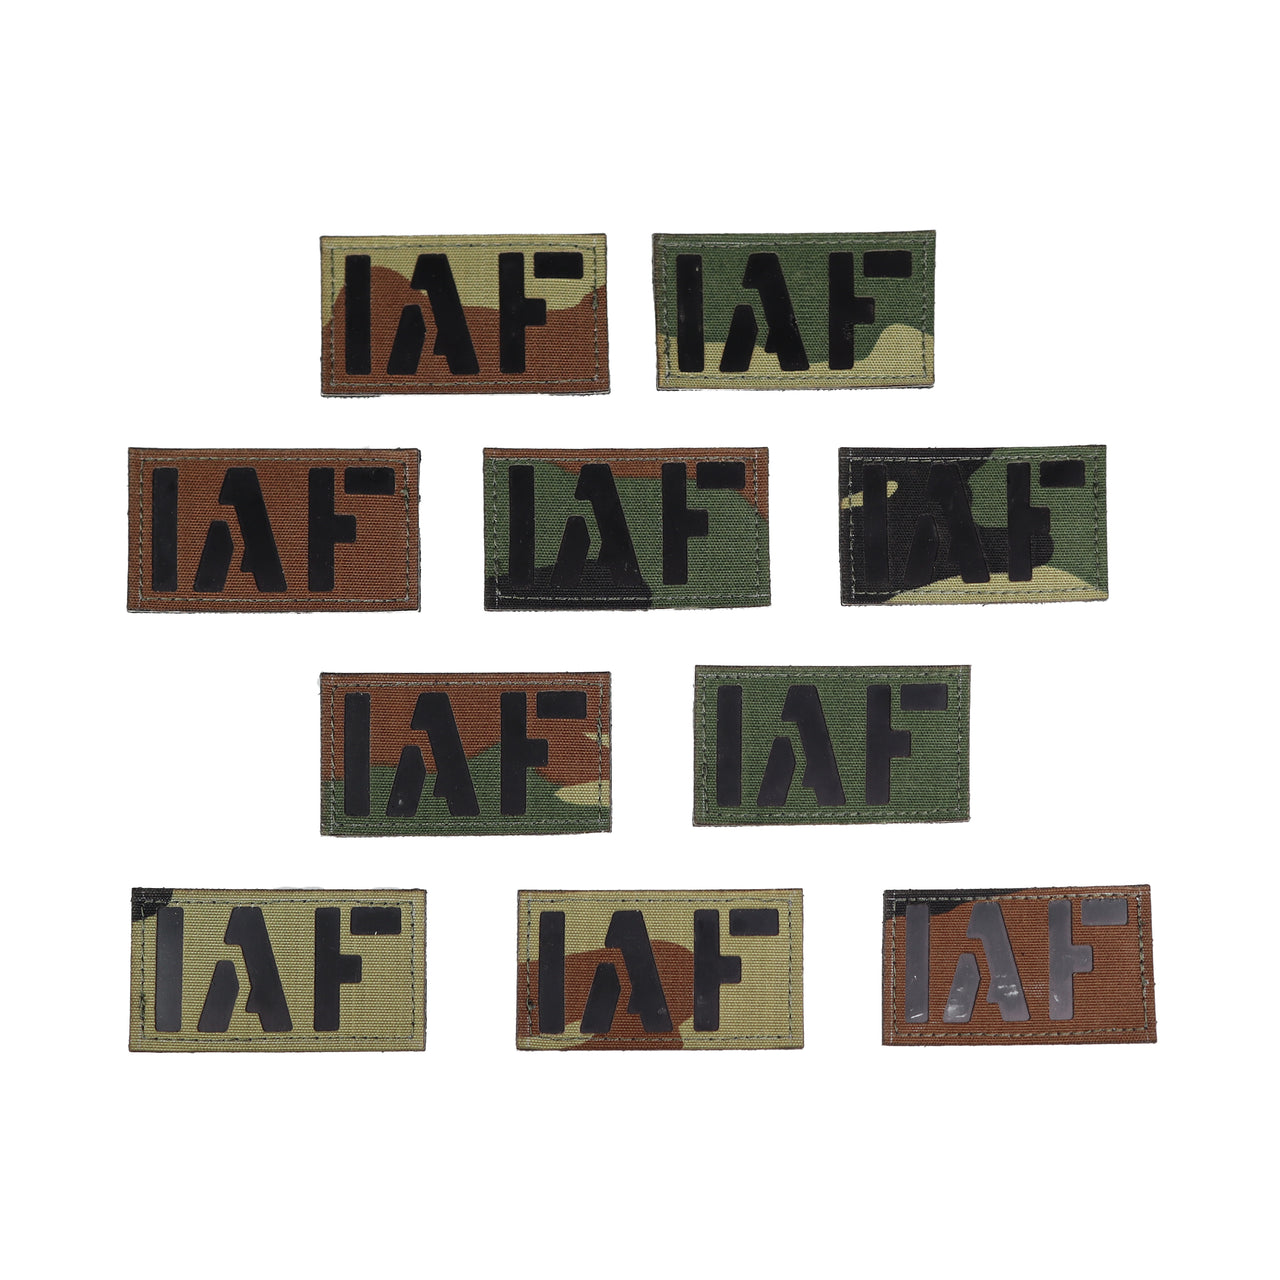 Lasecut Covert IR Patch - IAF -  2 x 3.5 Inches